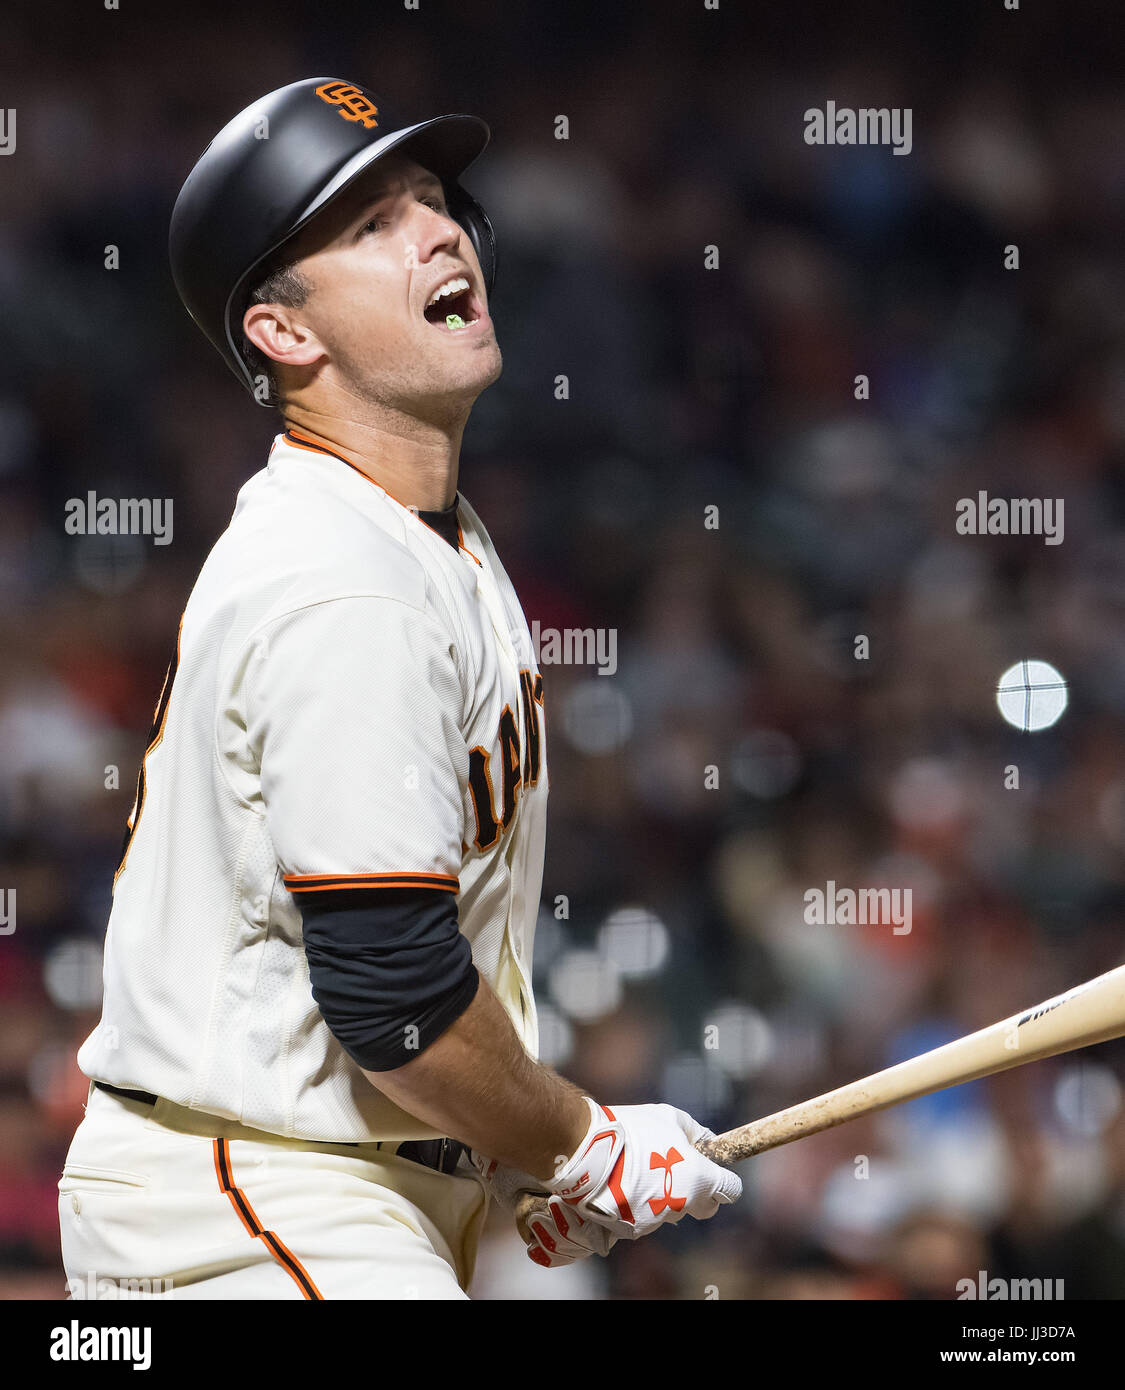 San Francisco, California, USA. 17th July, 2017. With two outs in the bottom of the ninth inning, San Francisco Giants catcher Buster Posey (28) watches his ball go foul, during a MLB baseball game between the Cleveland Indians and the San Francisco Giants at AT&T Park in San Francisco, California. Valerie Shoaps/CSM/Alamy Live News Stock Photo